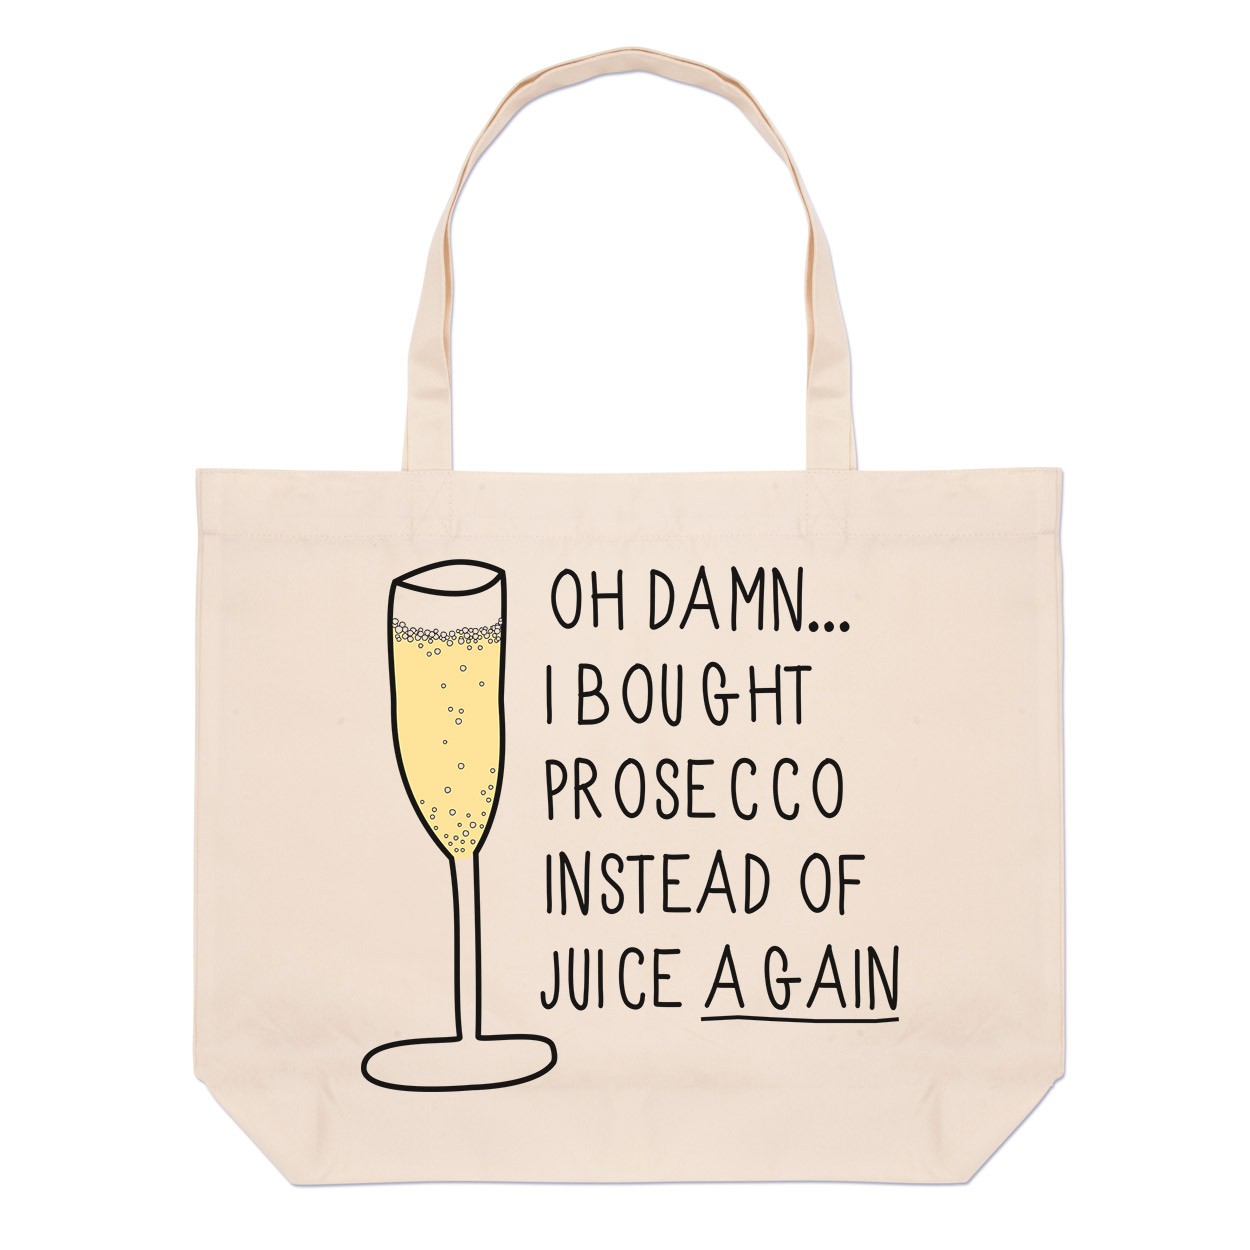 Oh Damn I Bought Prosecco Instead Of Juice Again Large Beach Tote Bag